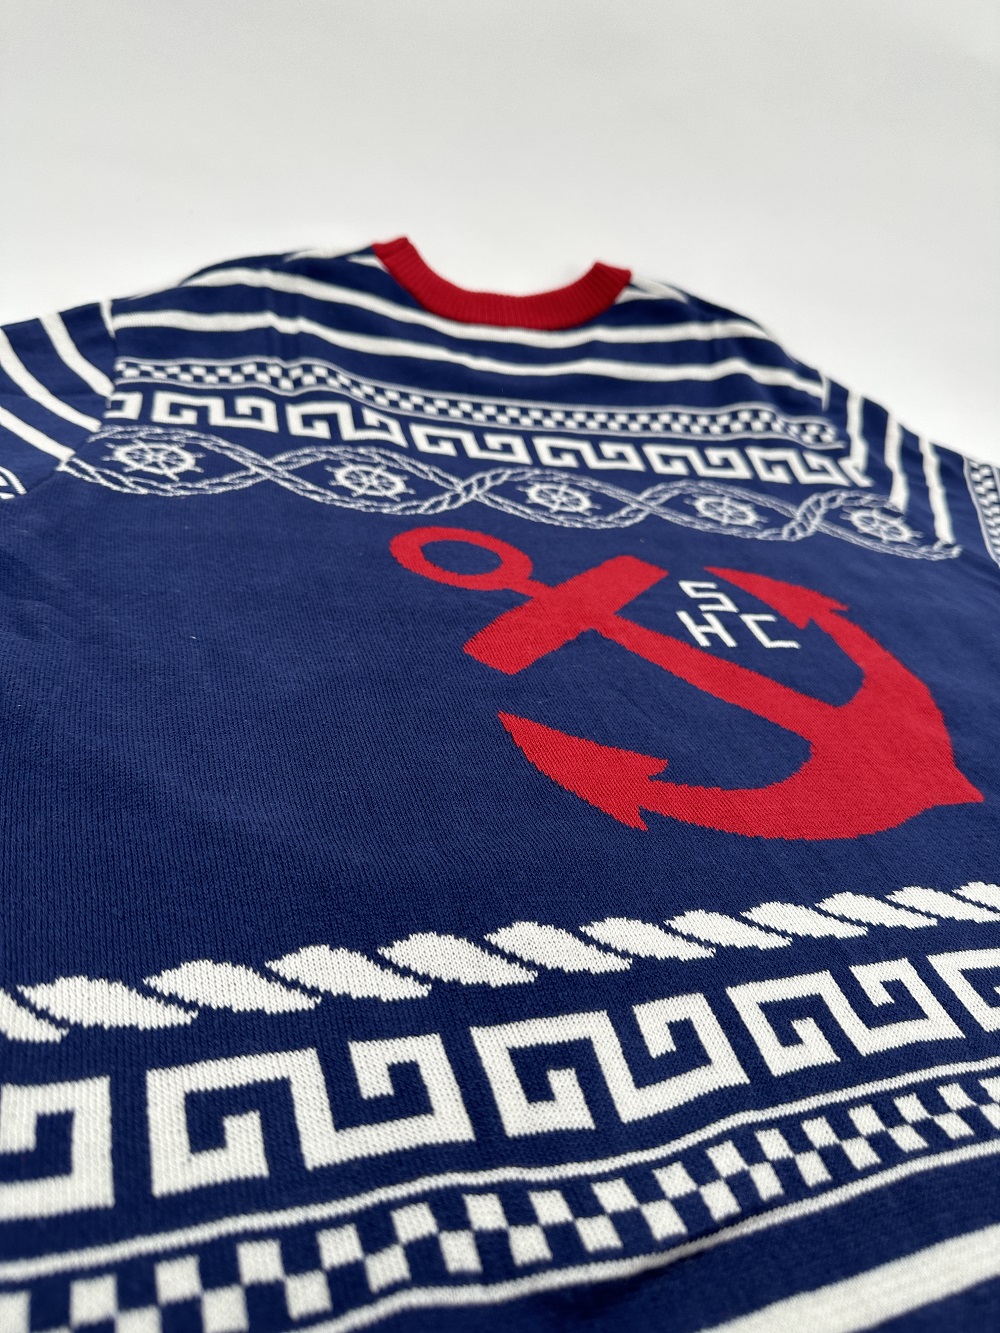 One Piece - Nautical Holiday Sweater - Crunchyroll Exclusive! image count 5